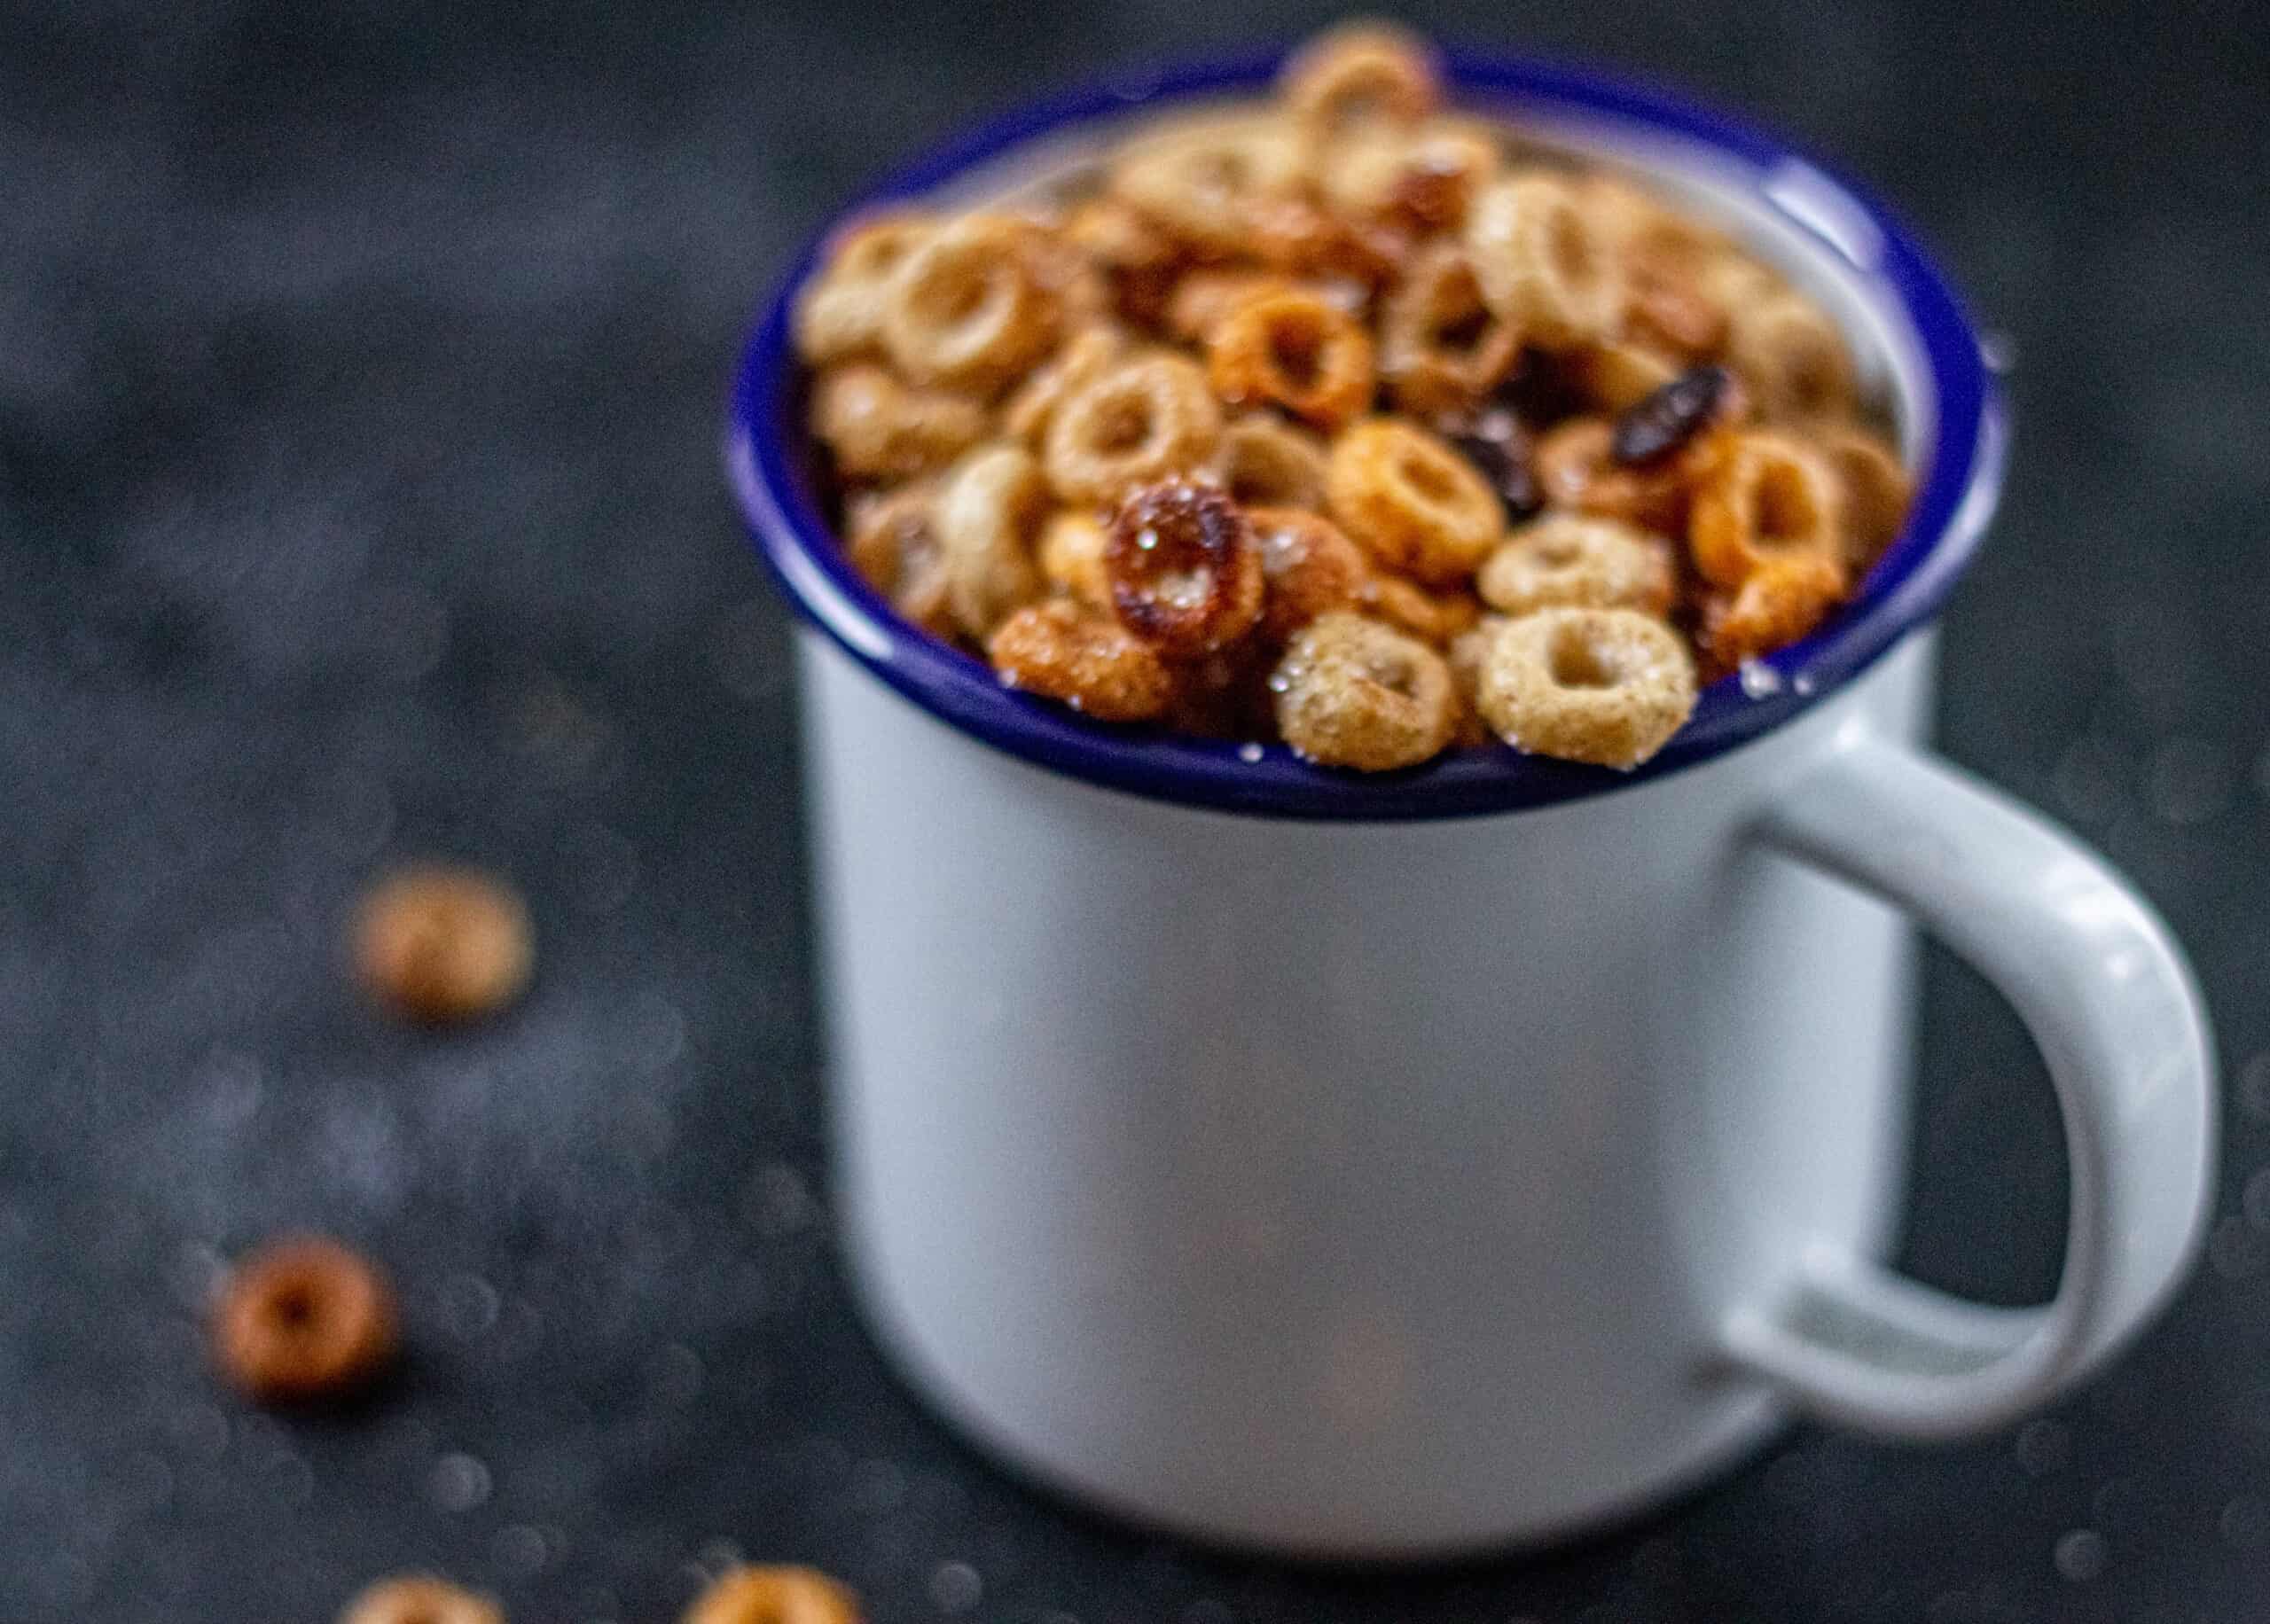 Toasted Cheerios in a cup